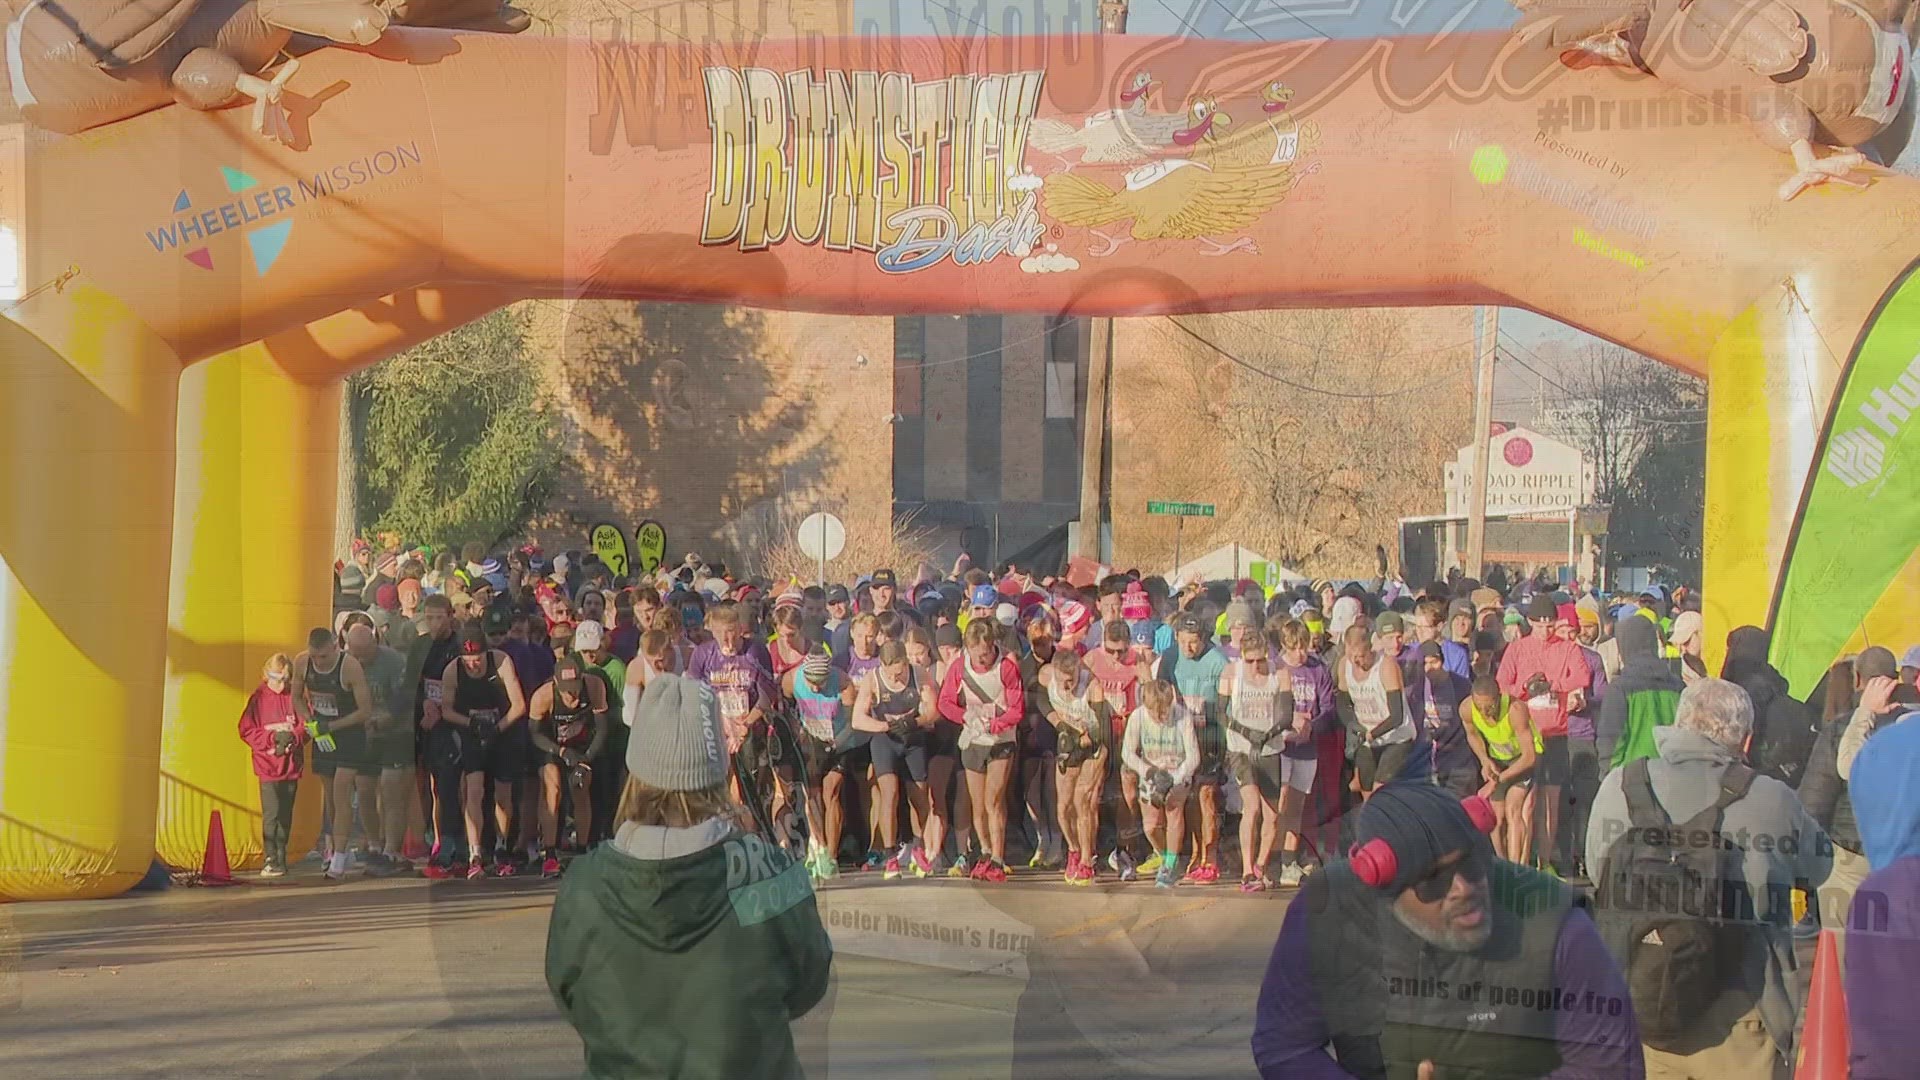 13Sports director Dave Calabro talks with Brian Crispin of the Wheeler Mission about how the Drumstick Dash on Thanksgiving Day helps Hoosiers in need.